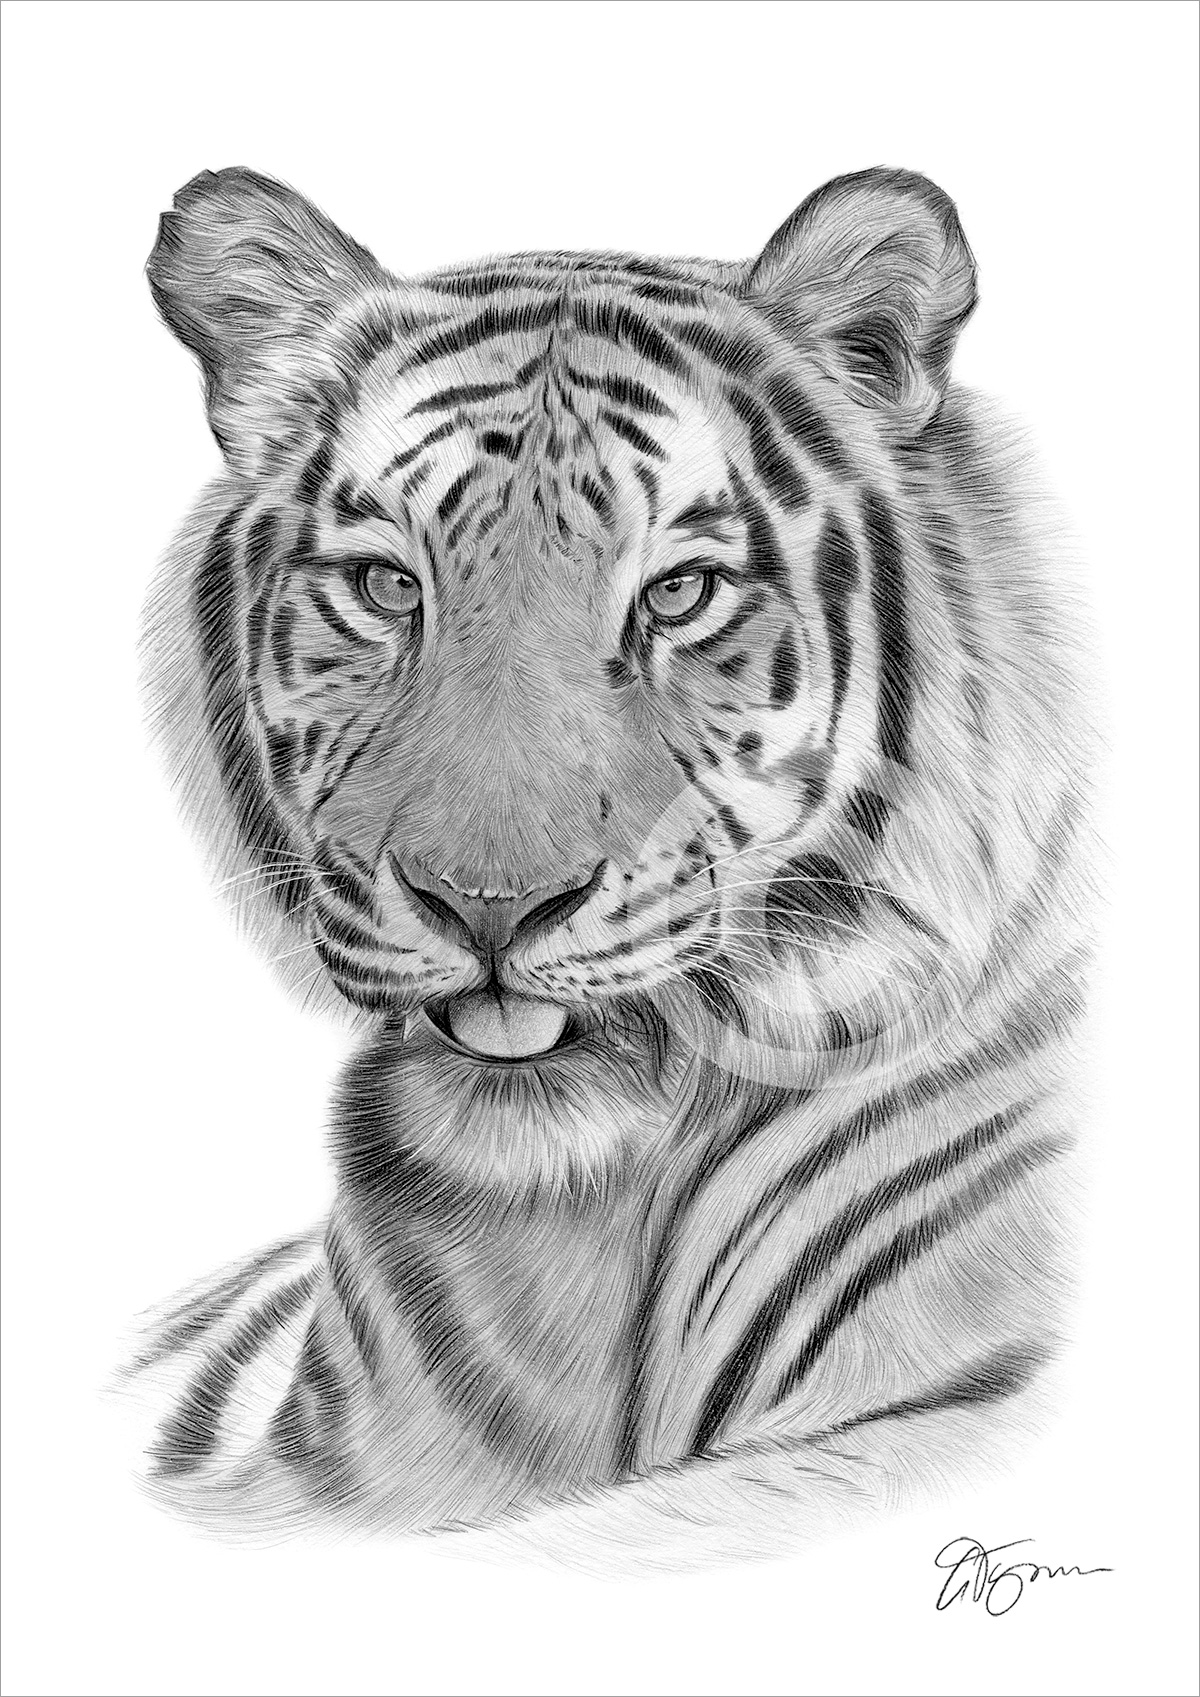 Pencil drawing of an adult Bengal tiger by UK artist Gary Tymon